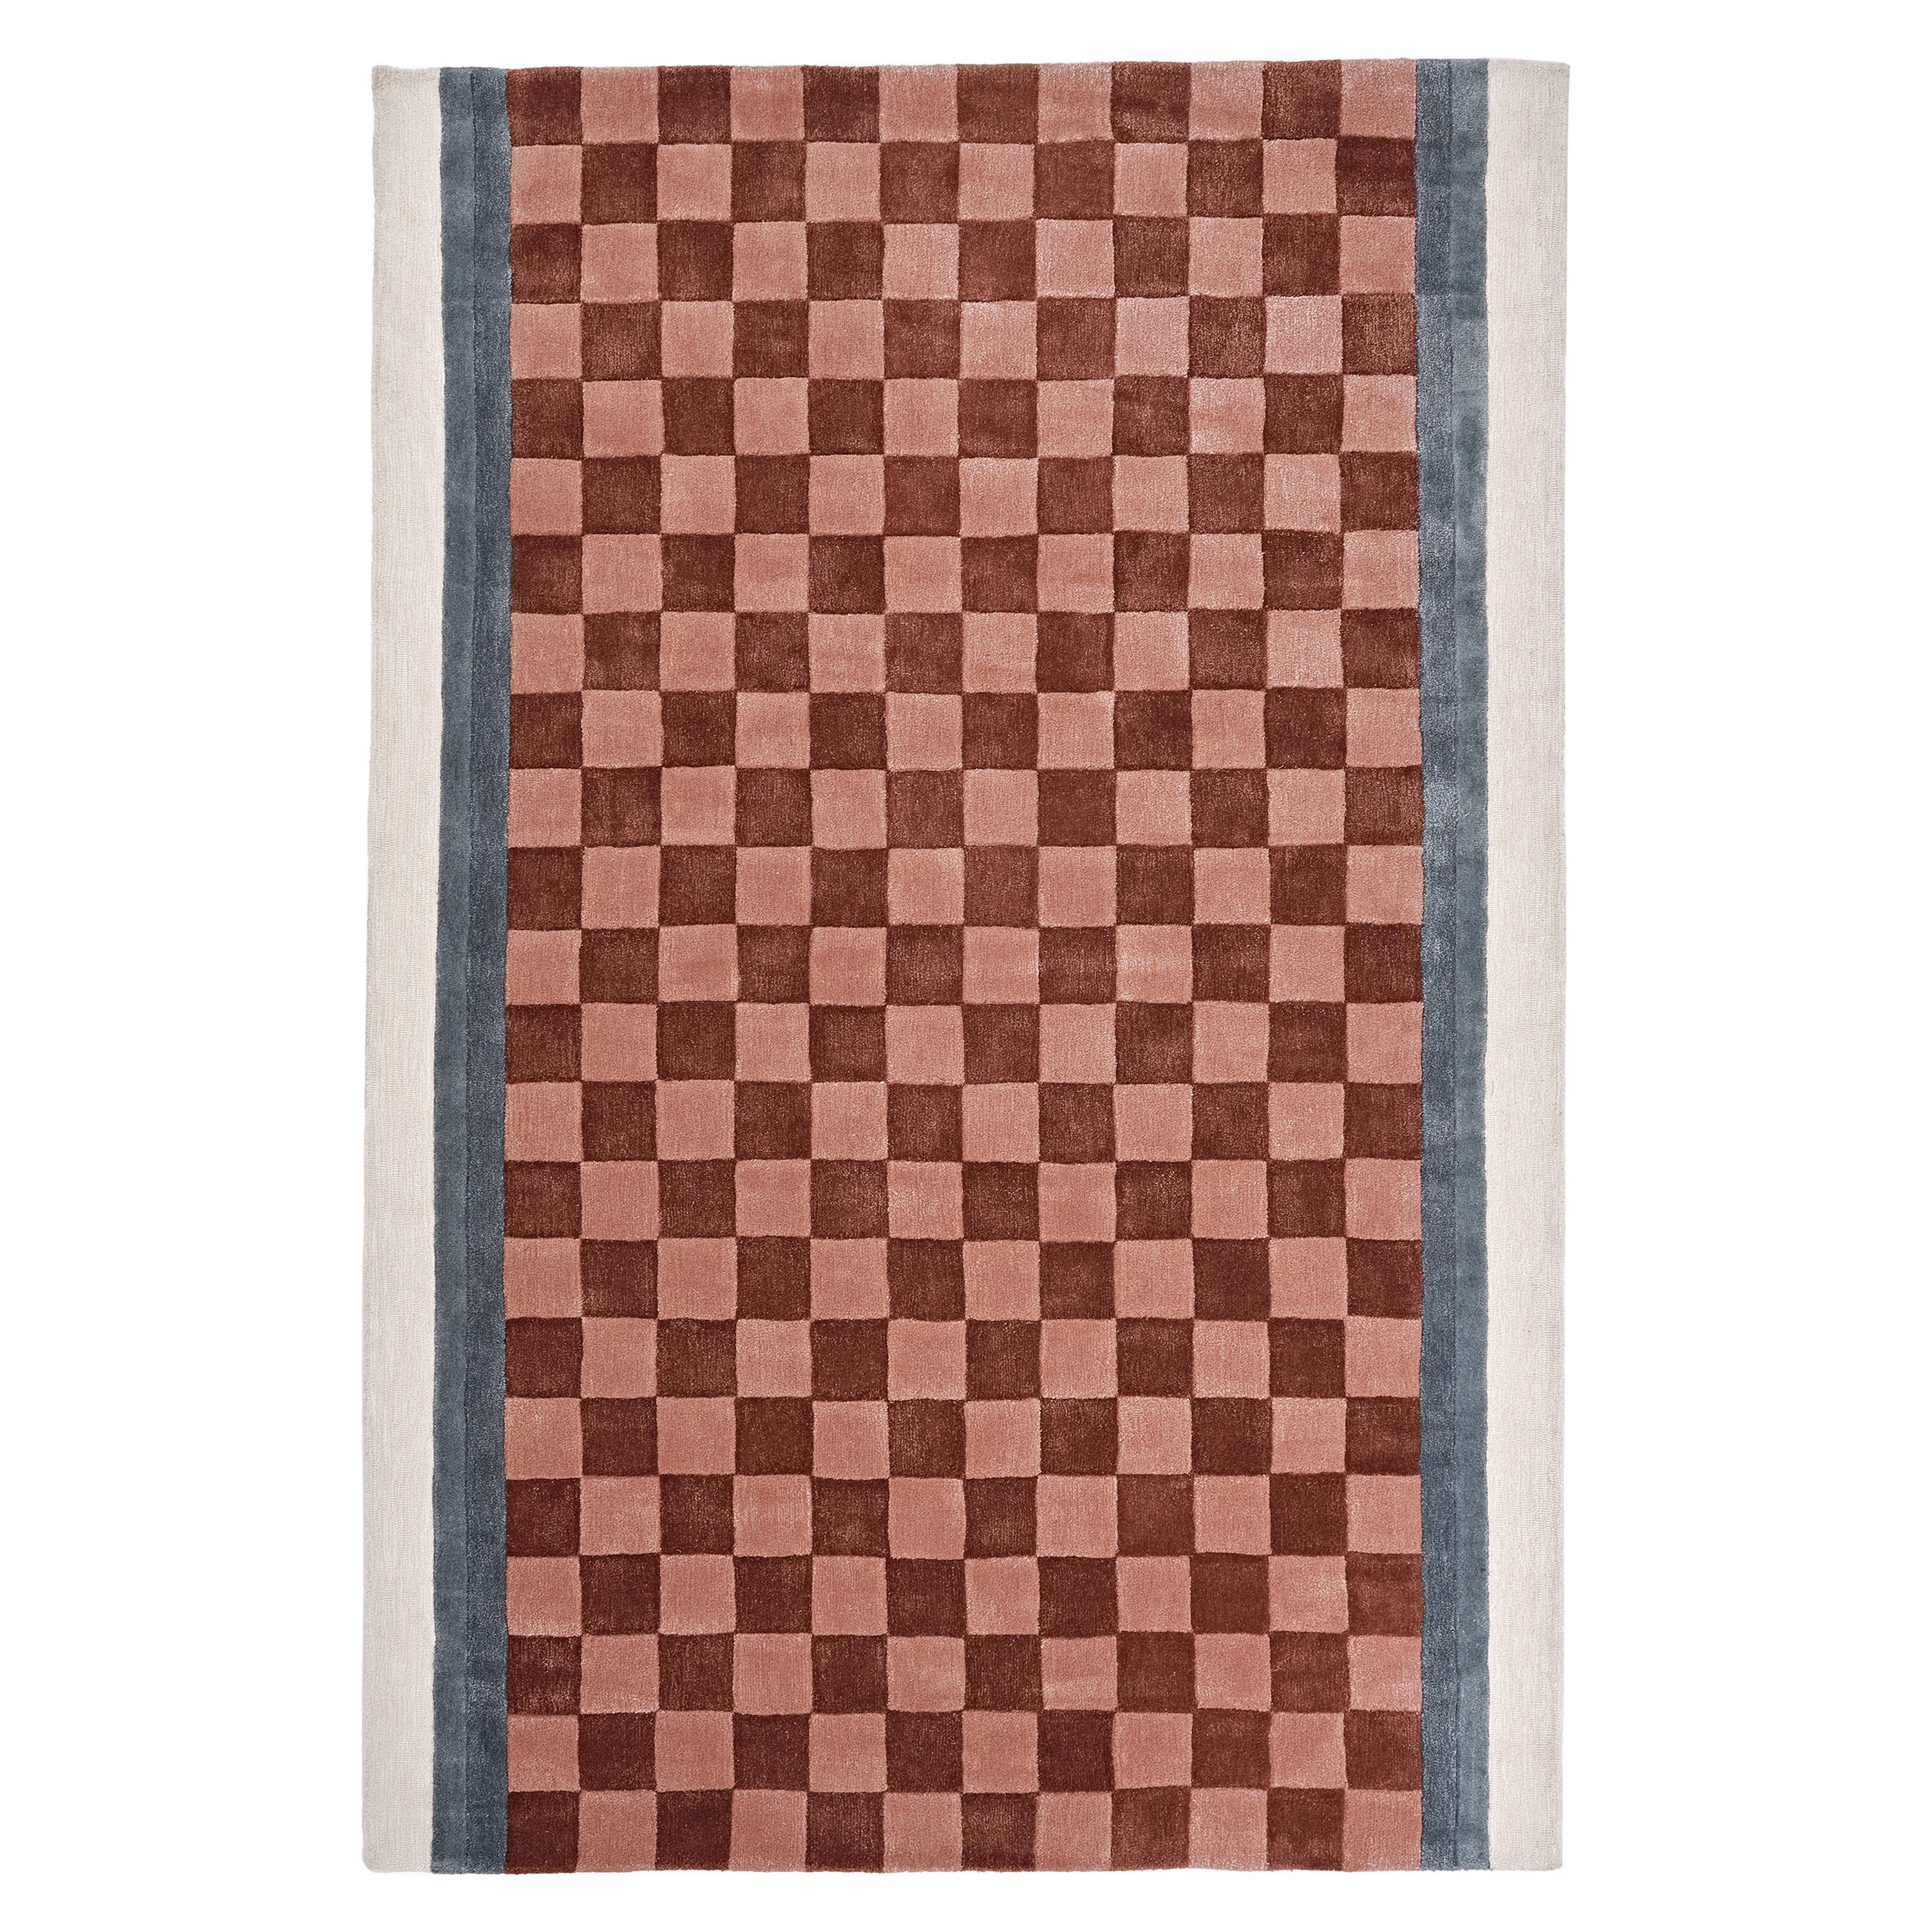 "Court Series" Finish Line Runner by Pieces, Hand-Tufted Grid Pattern Carpet For Sale